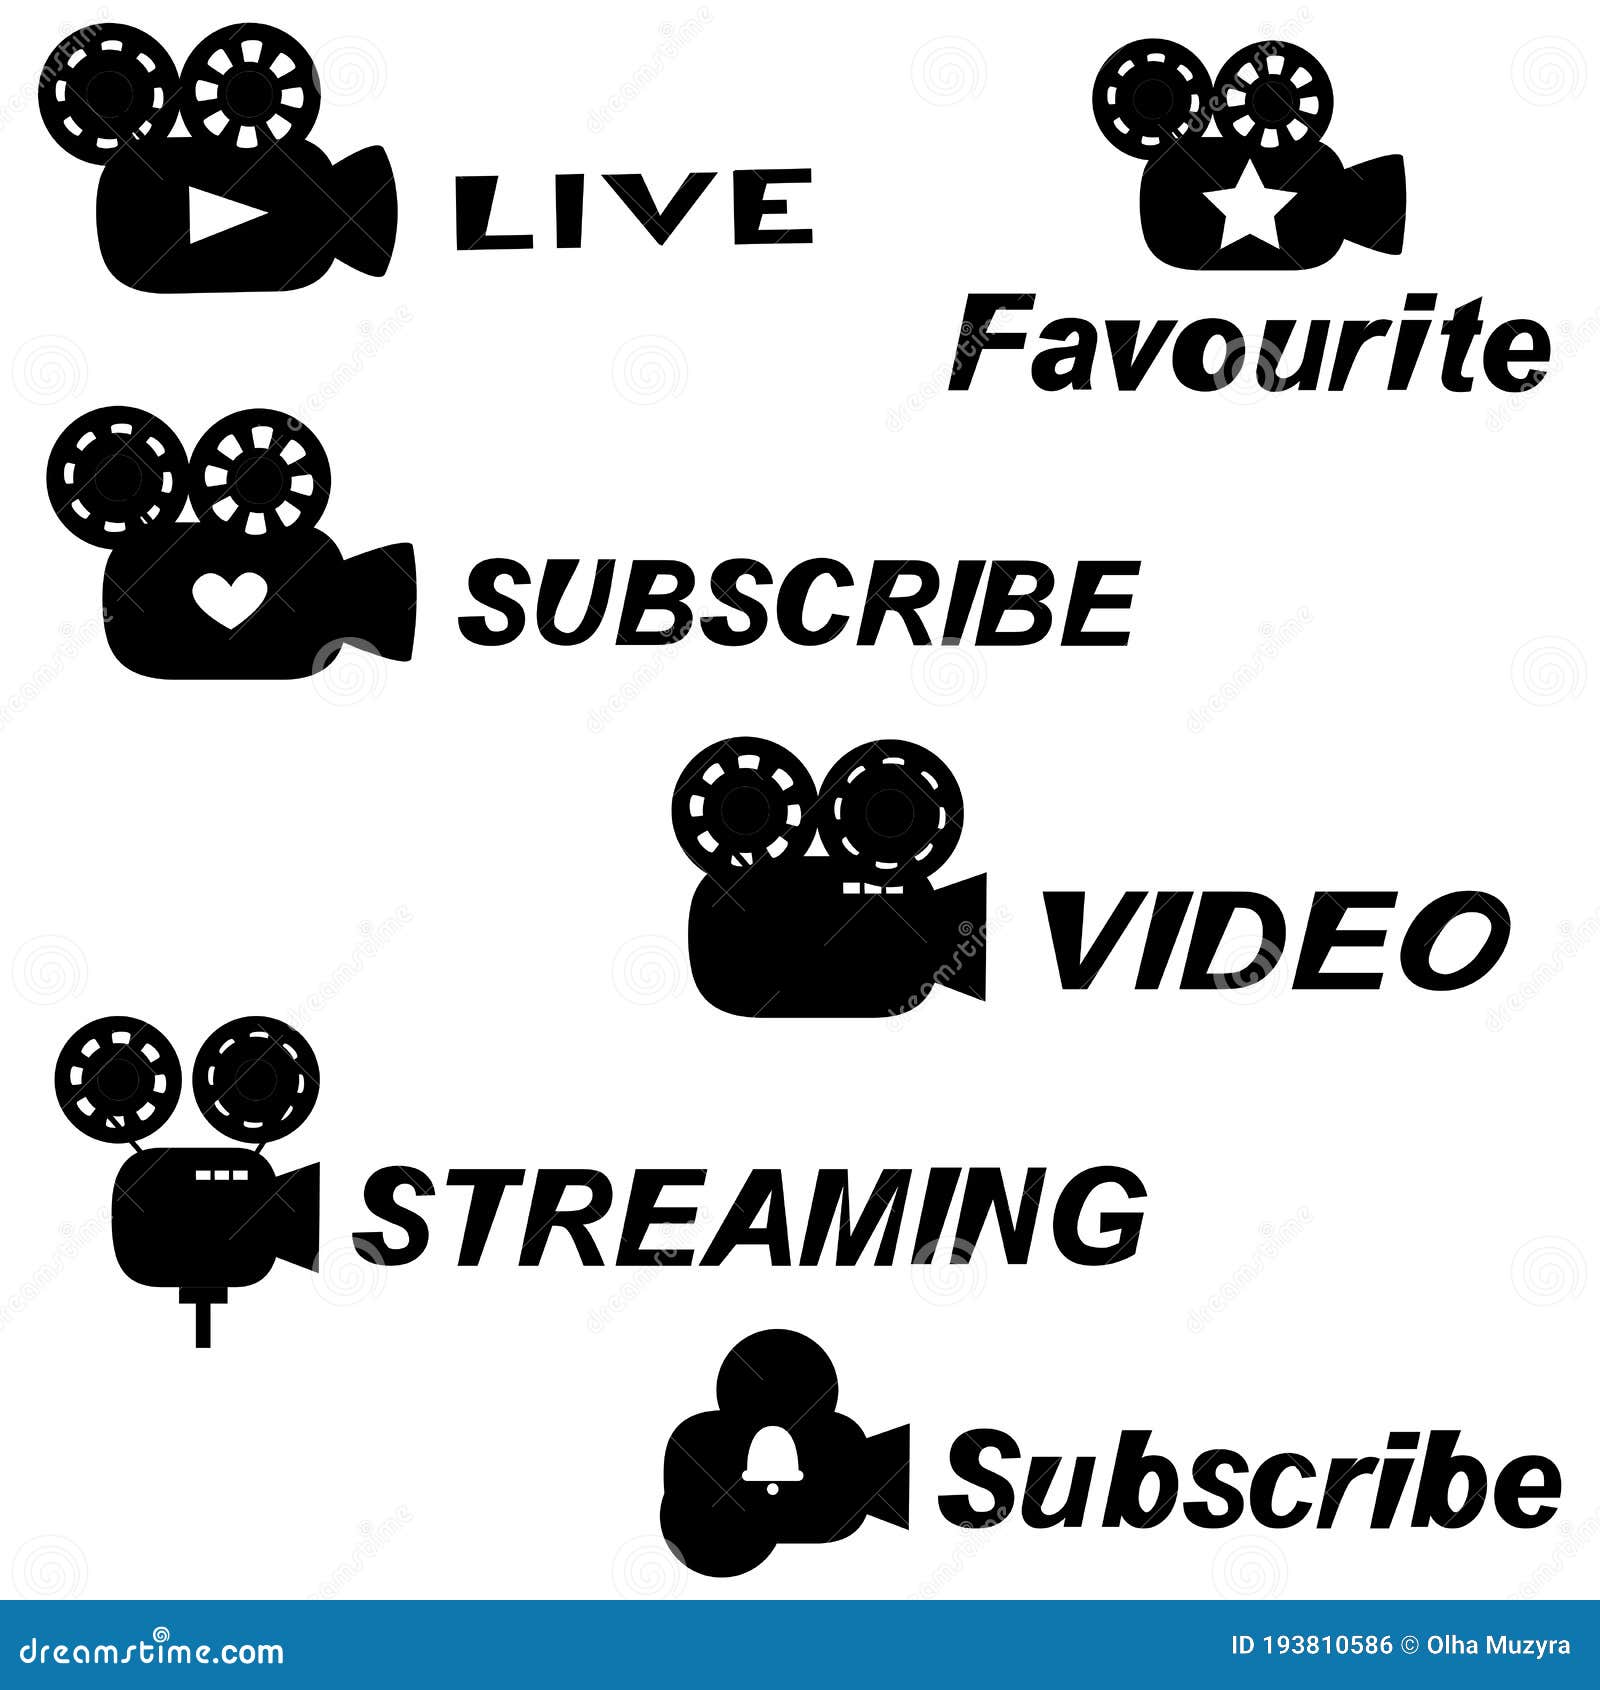 set of black icons of old camer - s of online streaming, live video, subscribe and favourite for blog